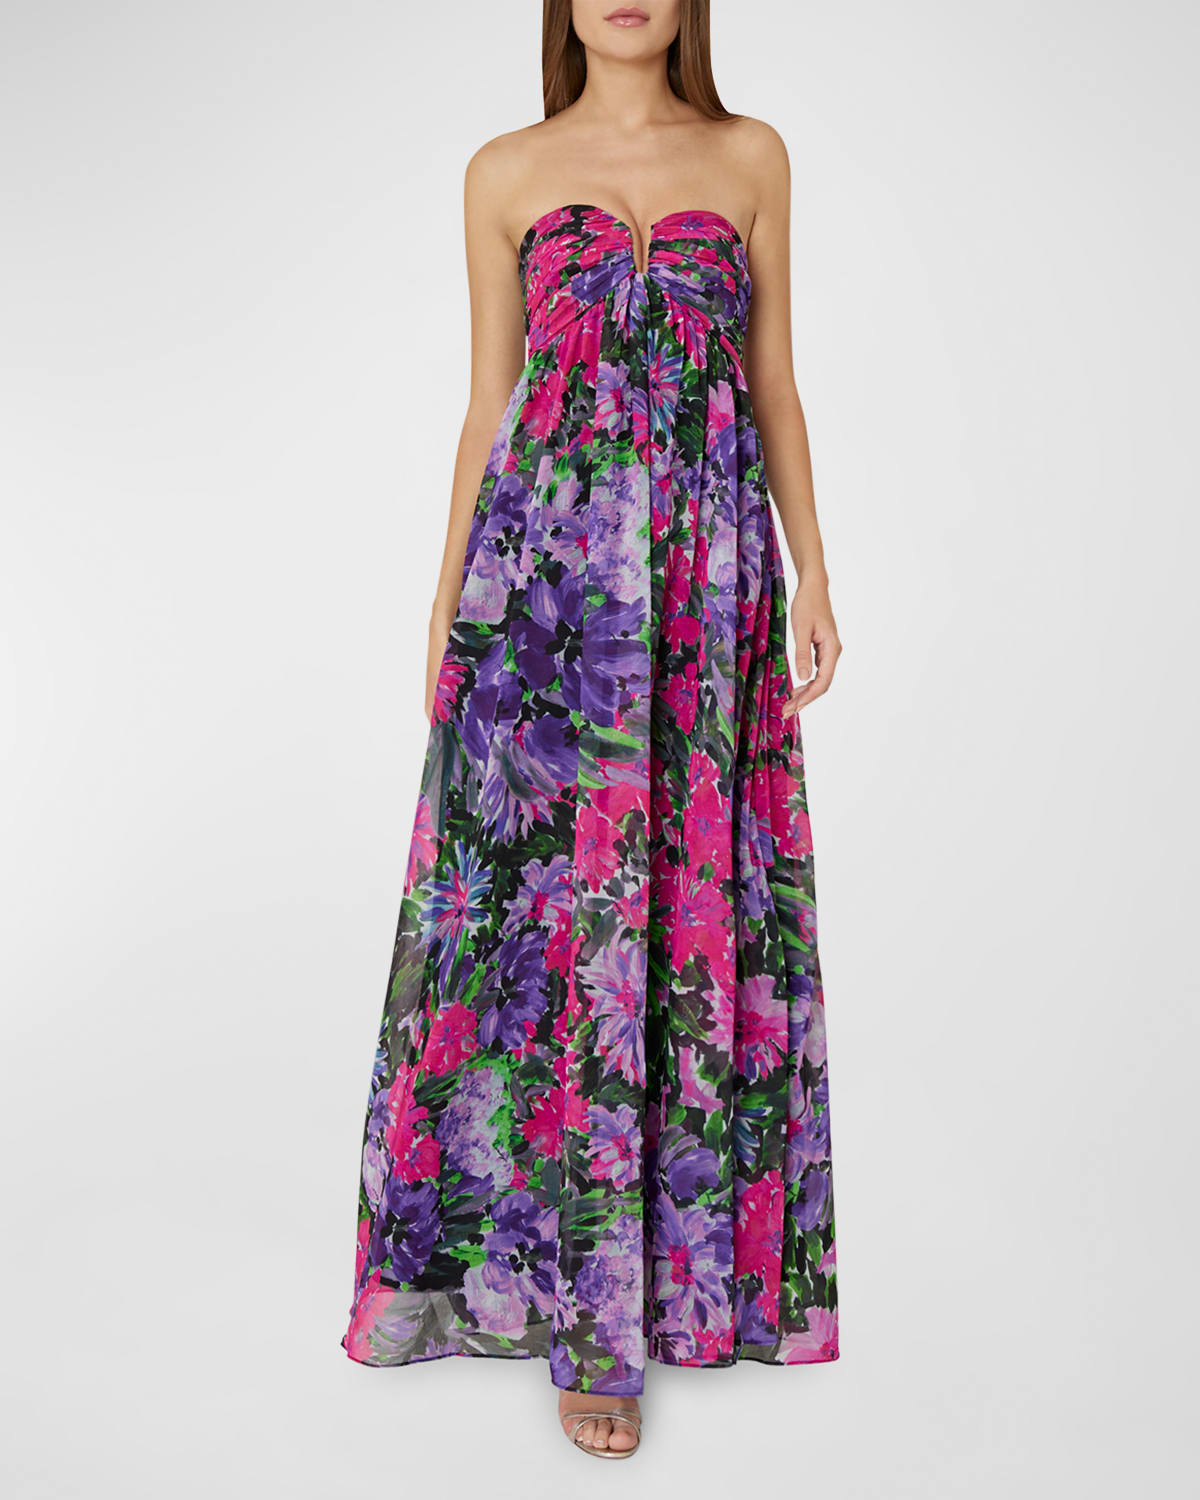 MILLY RIVER GARDEN STRAPLESS FLORAL-PRINT GOWN